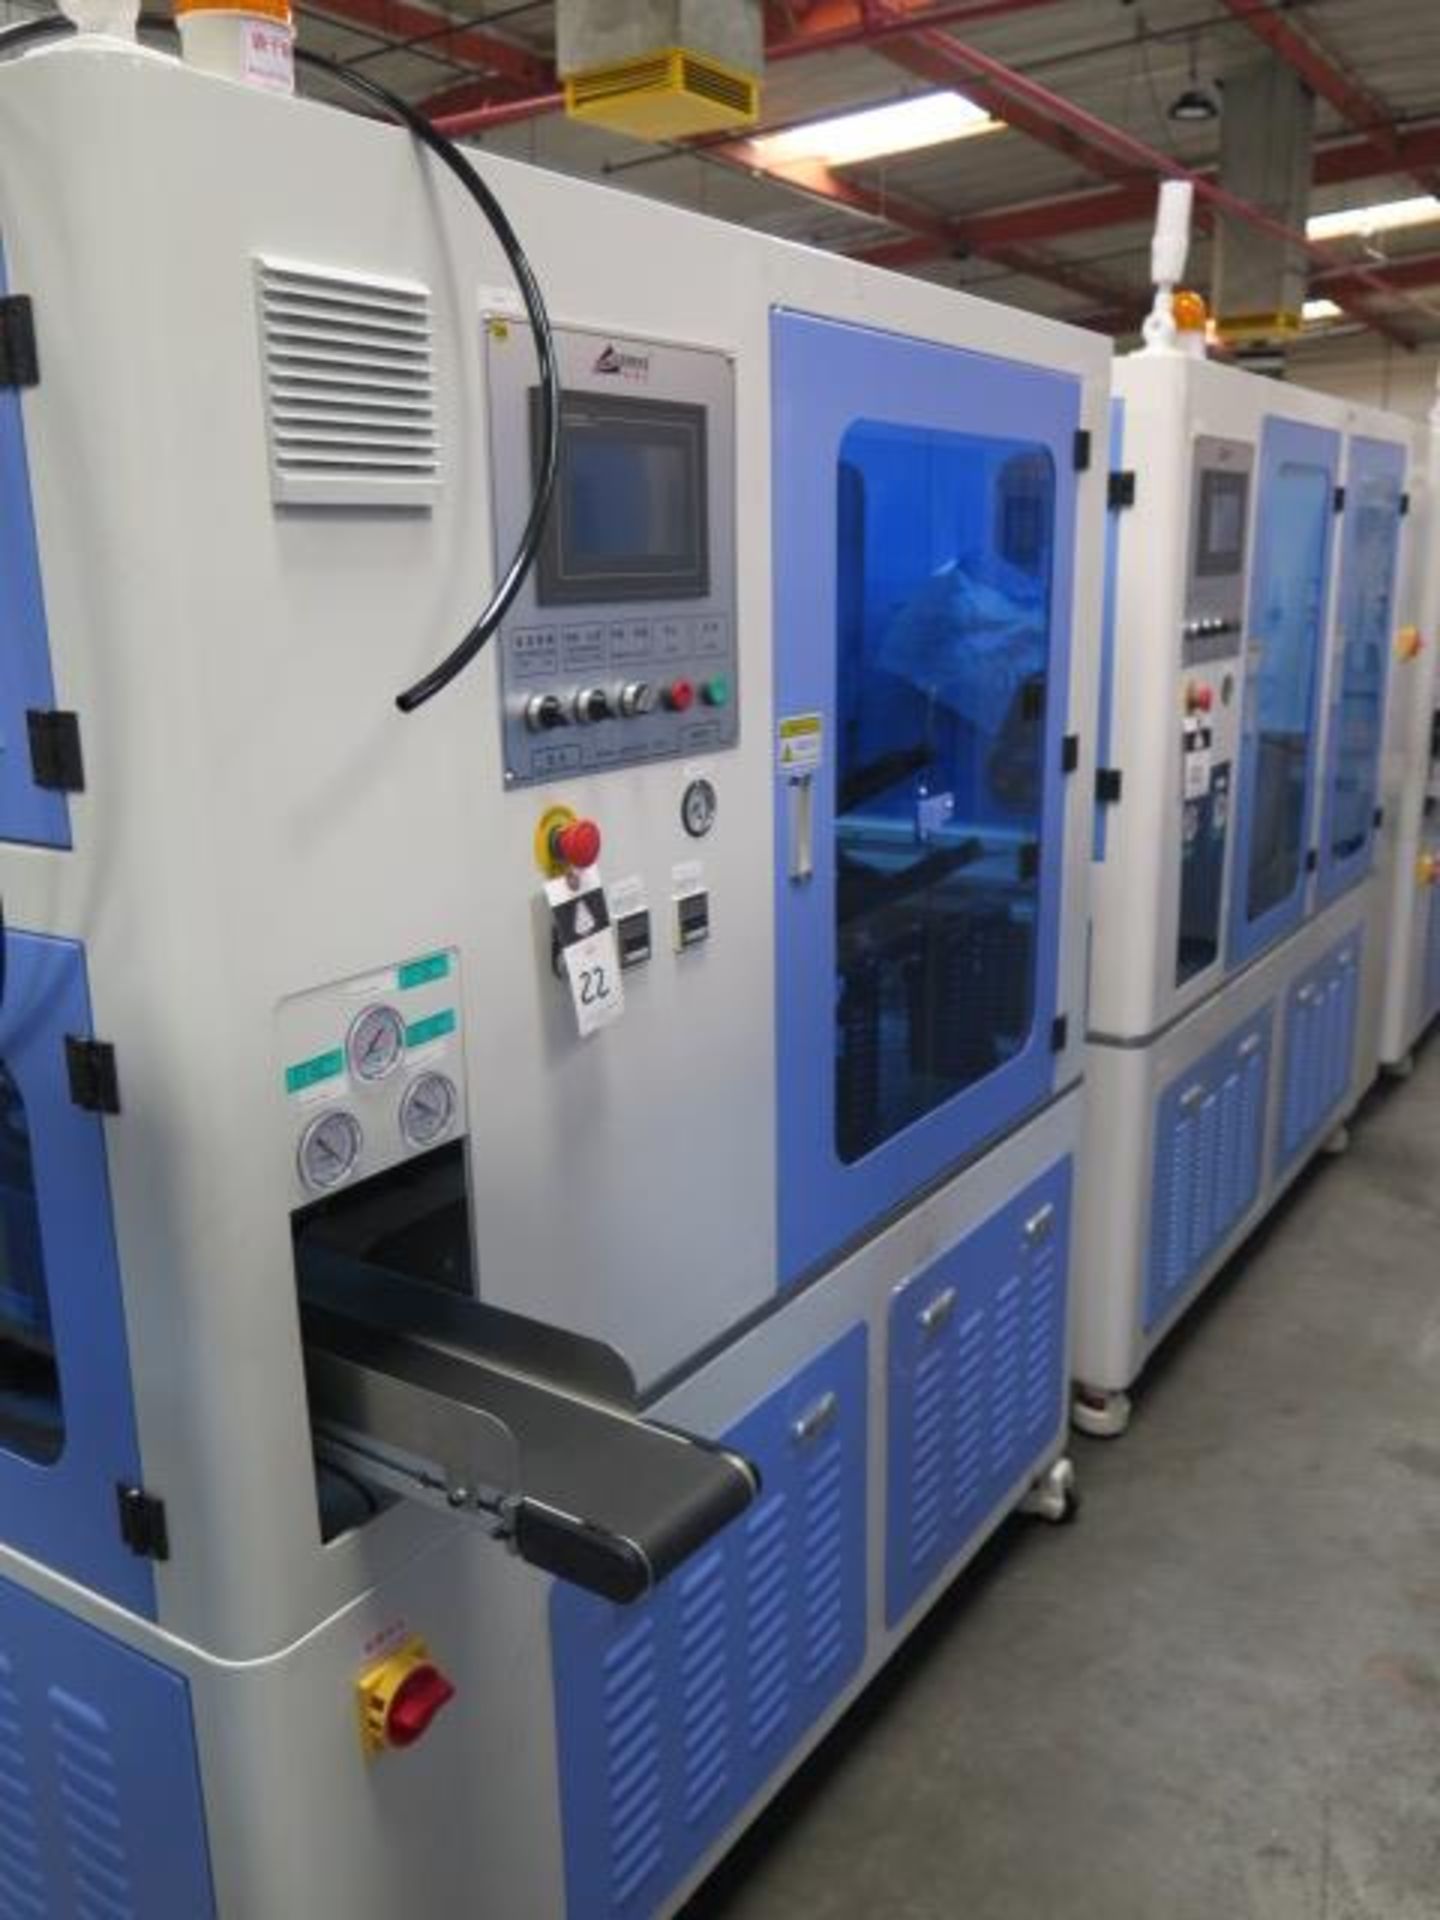 2/2021 Gereke mdl. GRK-TWO1 Cassette Assembly and Packaging Line s/n GRK20210227050, SOLD AS IS